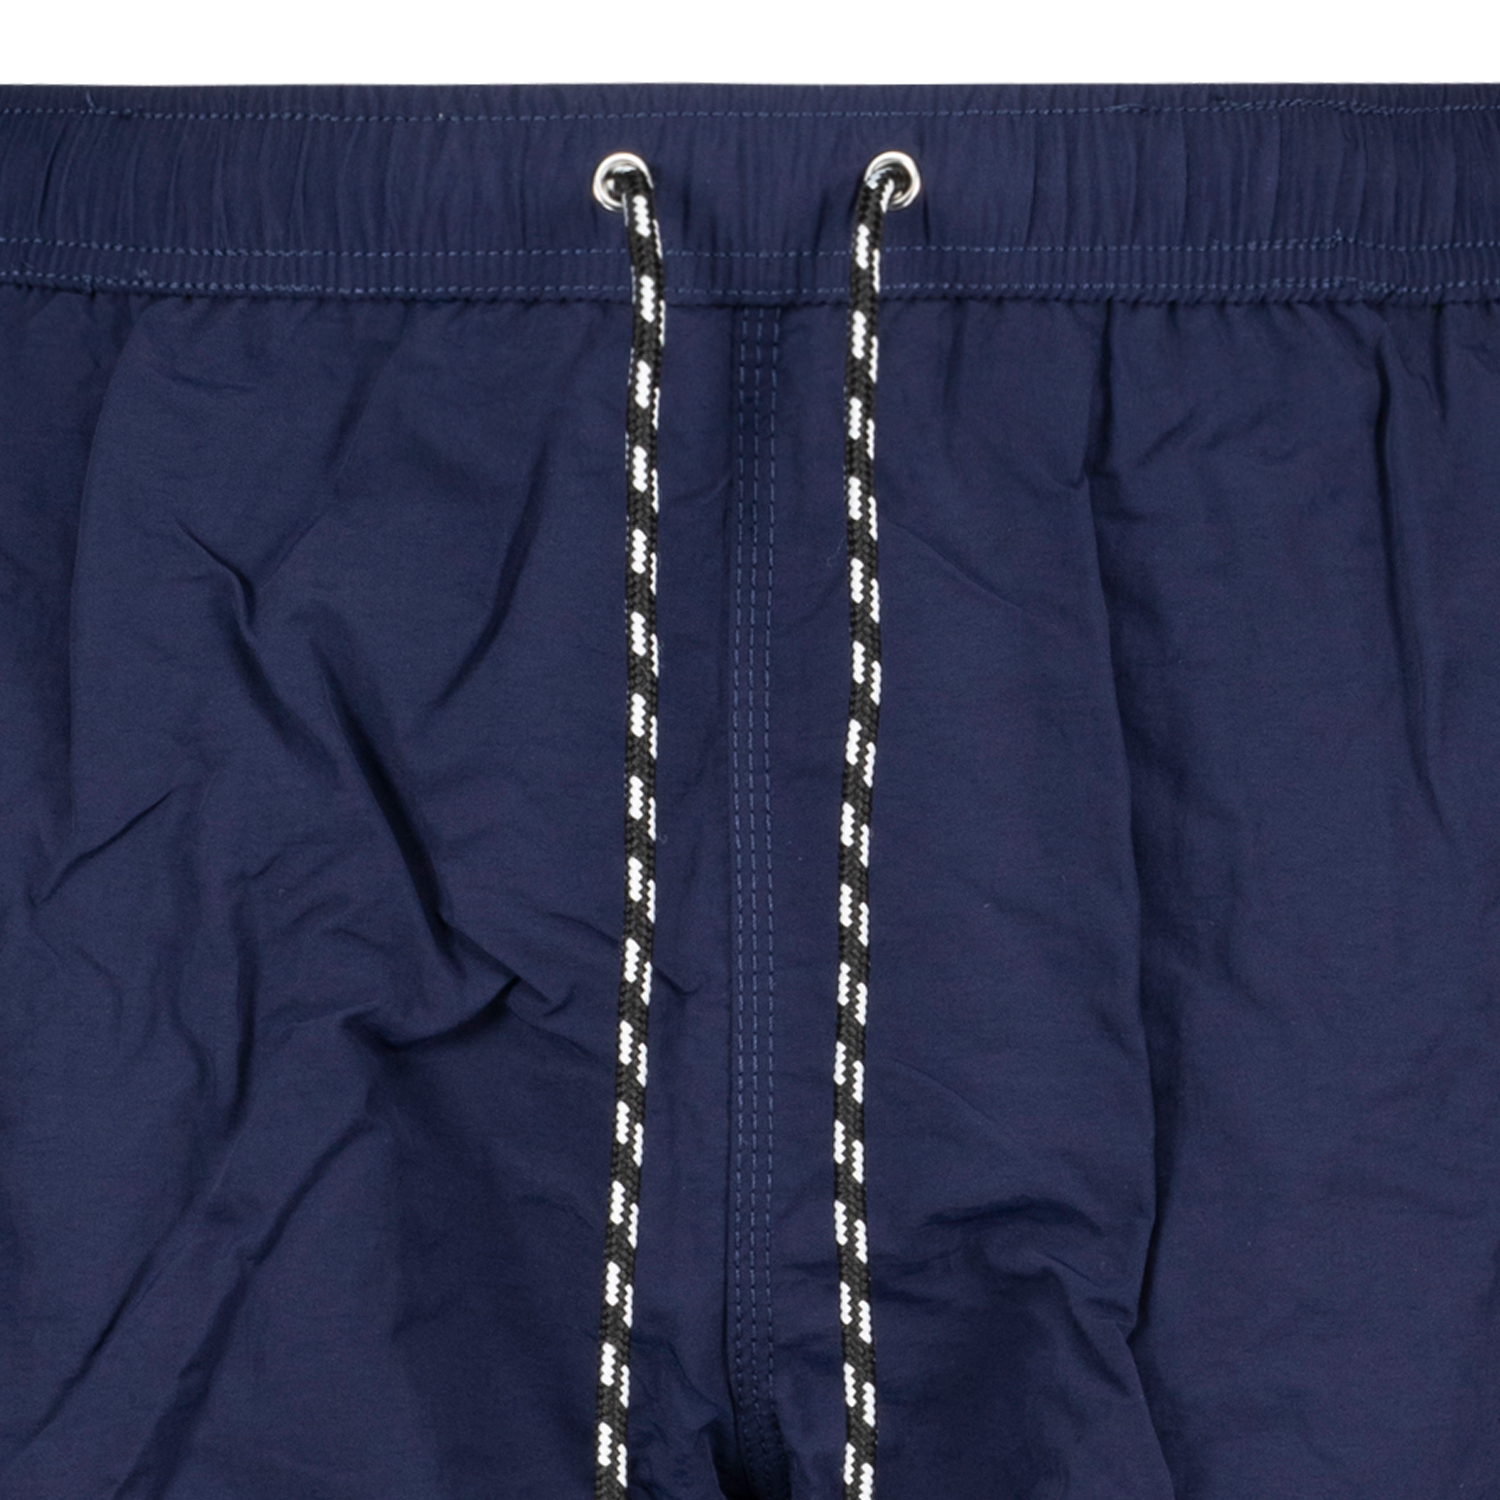 Swimming trunks in navy by aero/North 56°4 in plus sizes up to 8XL